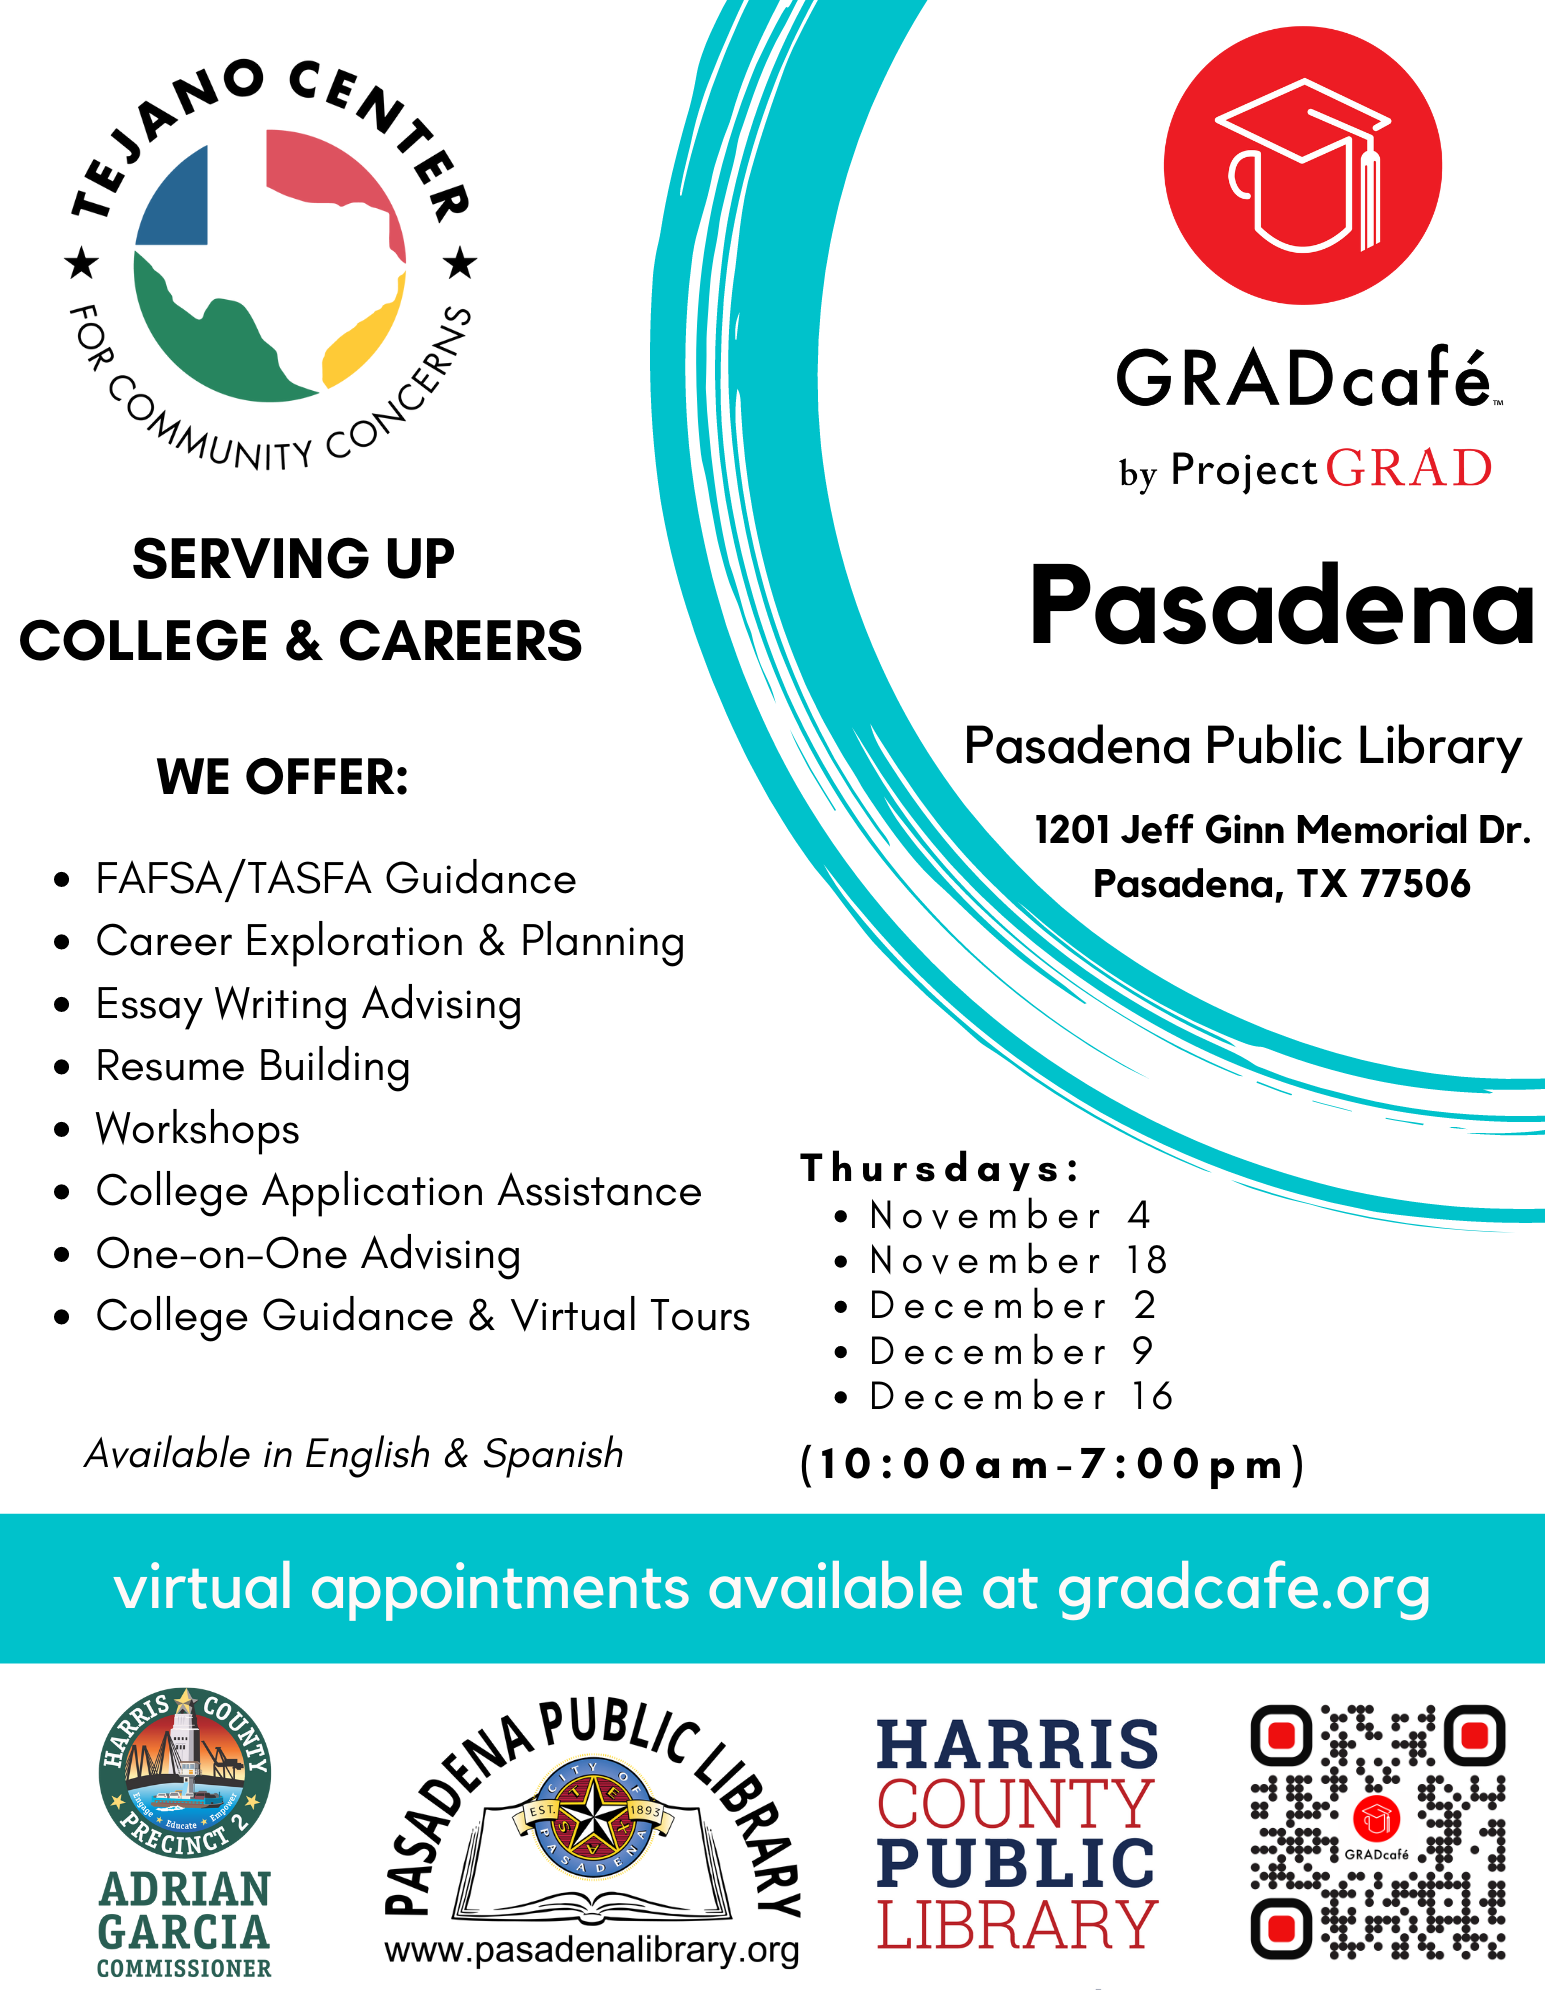 Need help with your Financial Aid application? GRADcafé will be at Central Library for in-person advising Thursdays from 10:00AM to 7:00PM.